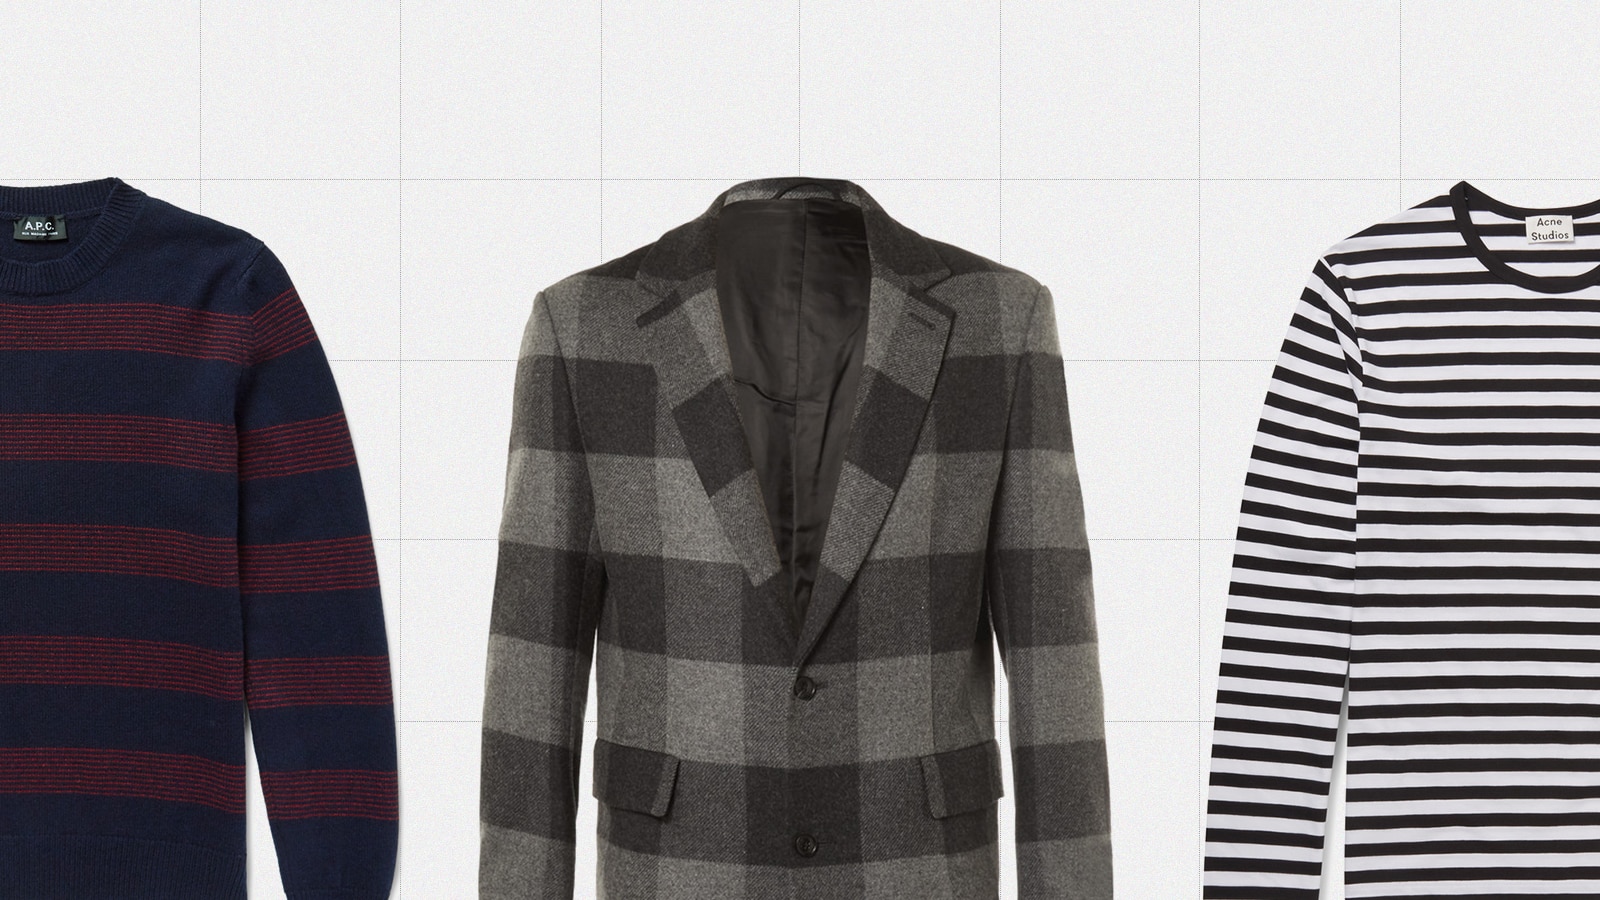 Earn Your Stripes (And Checks) | The Journal | MR PORTER